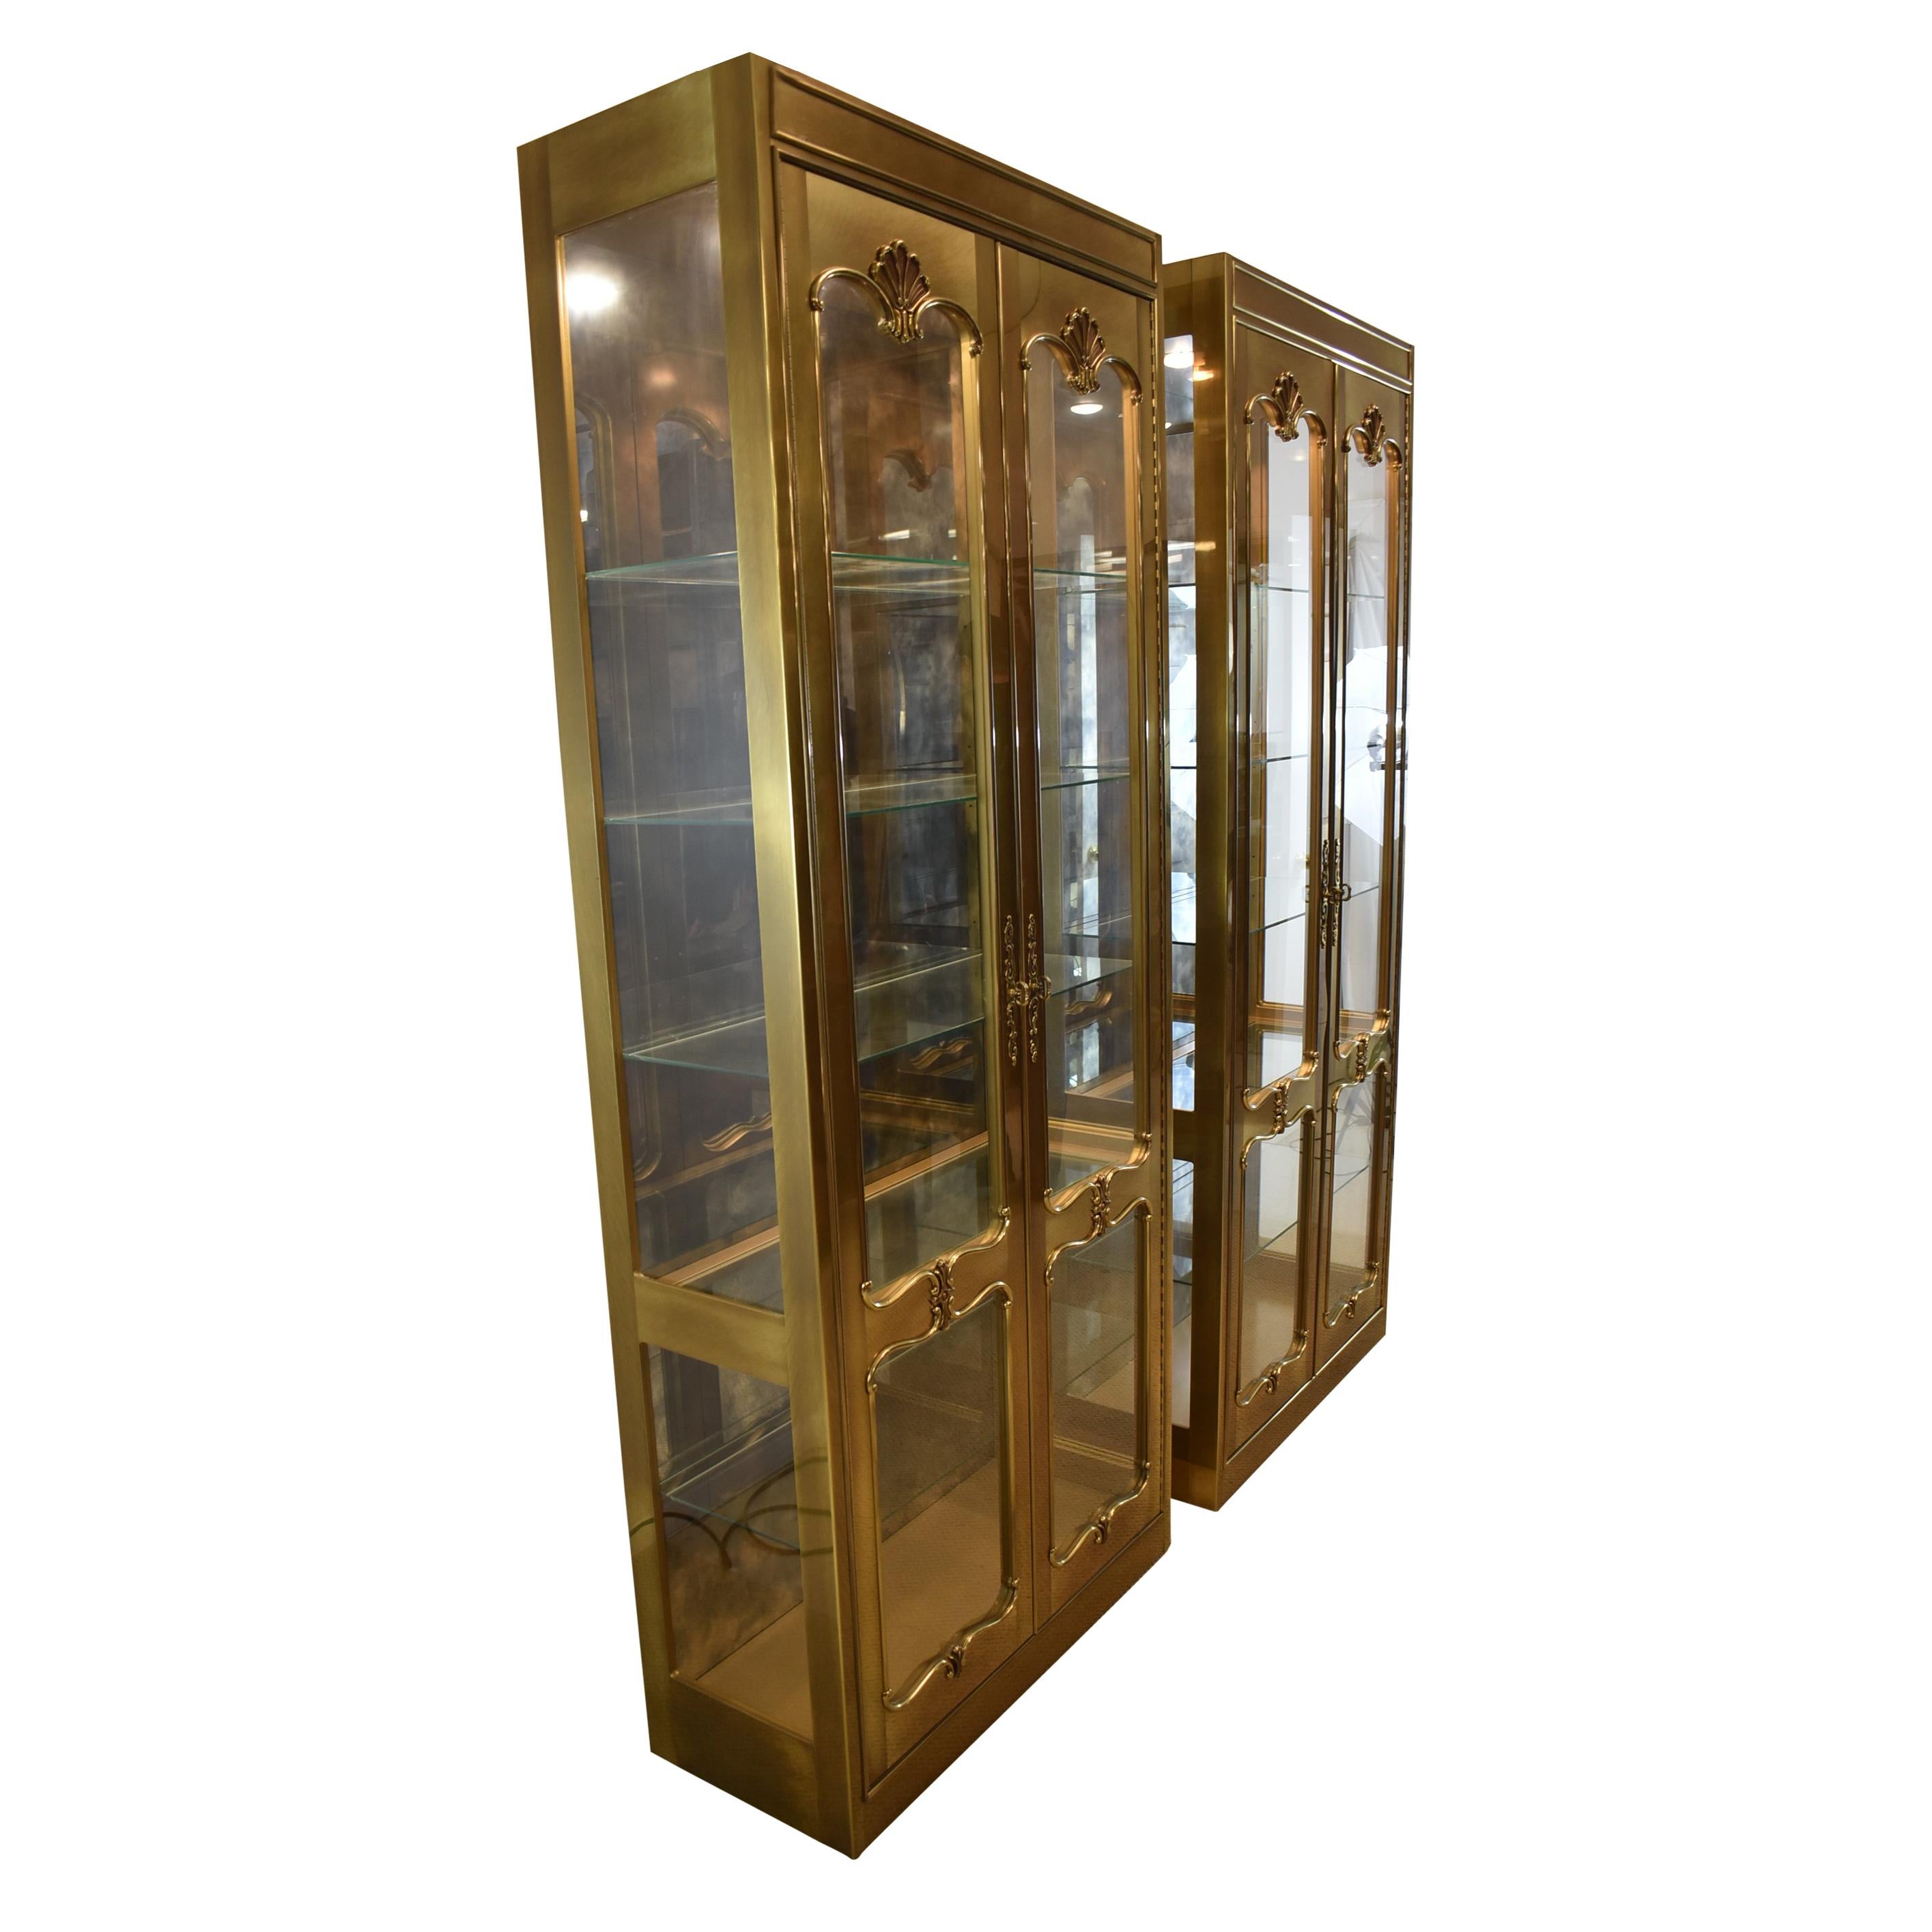 Pair of Mastercraft brass curio cabinets. Double doors open to a lighted interior with adjustable glass shelf.